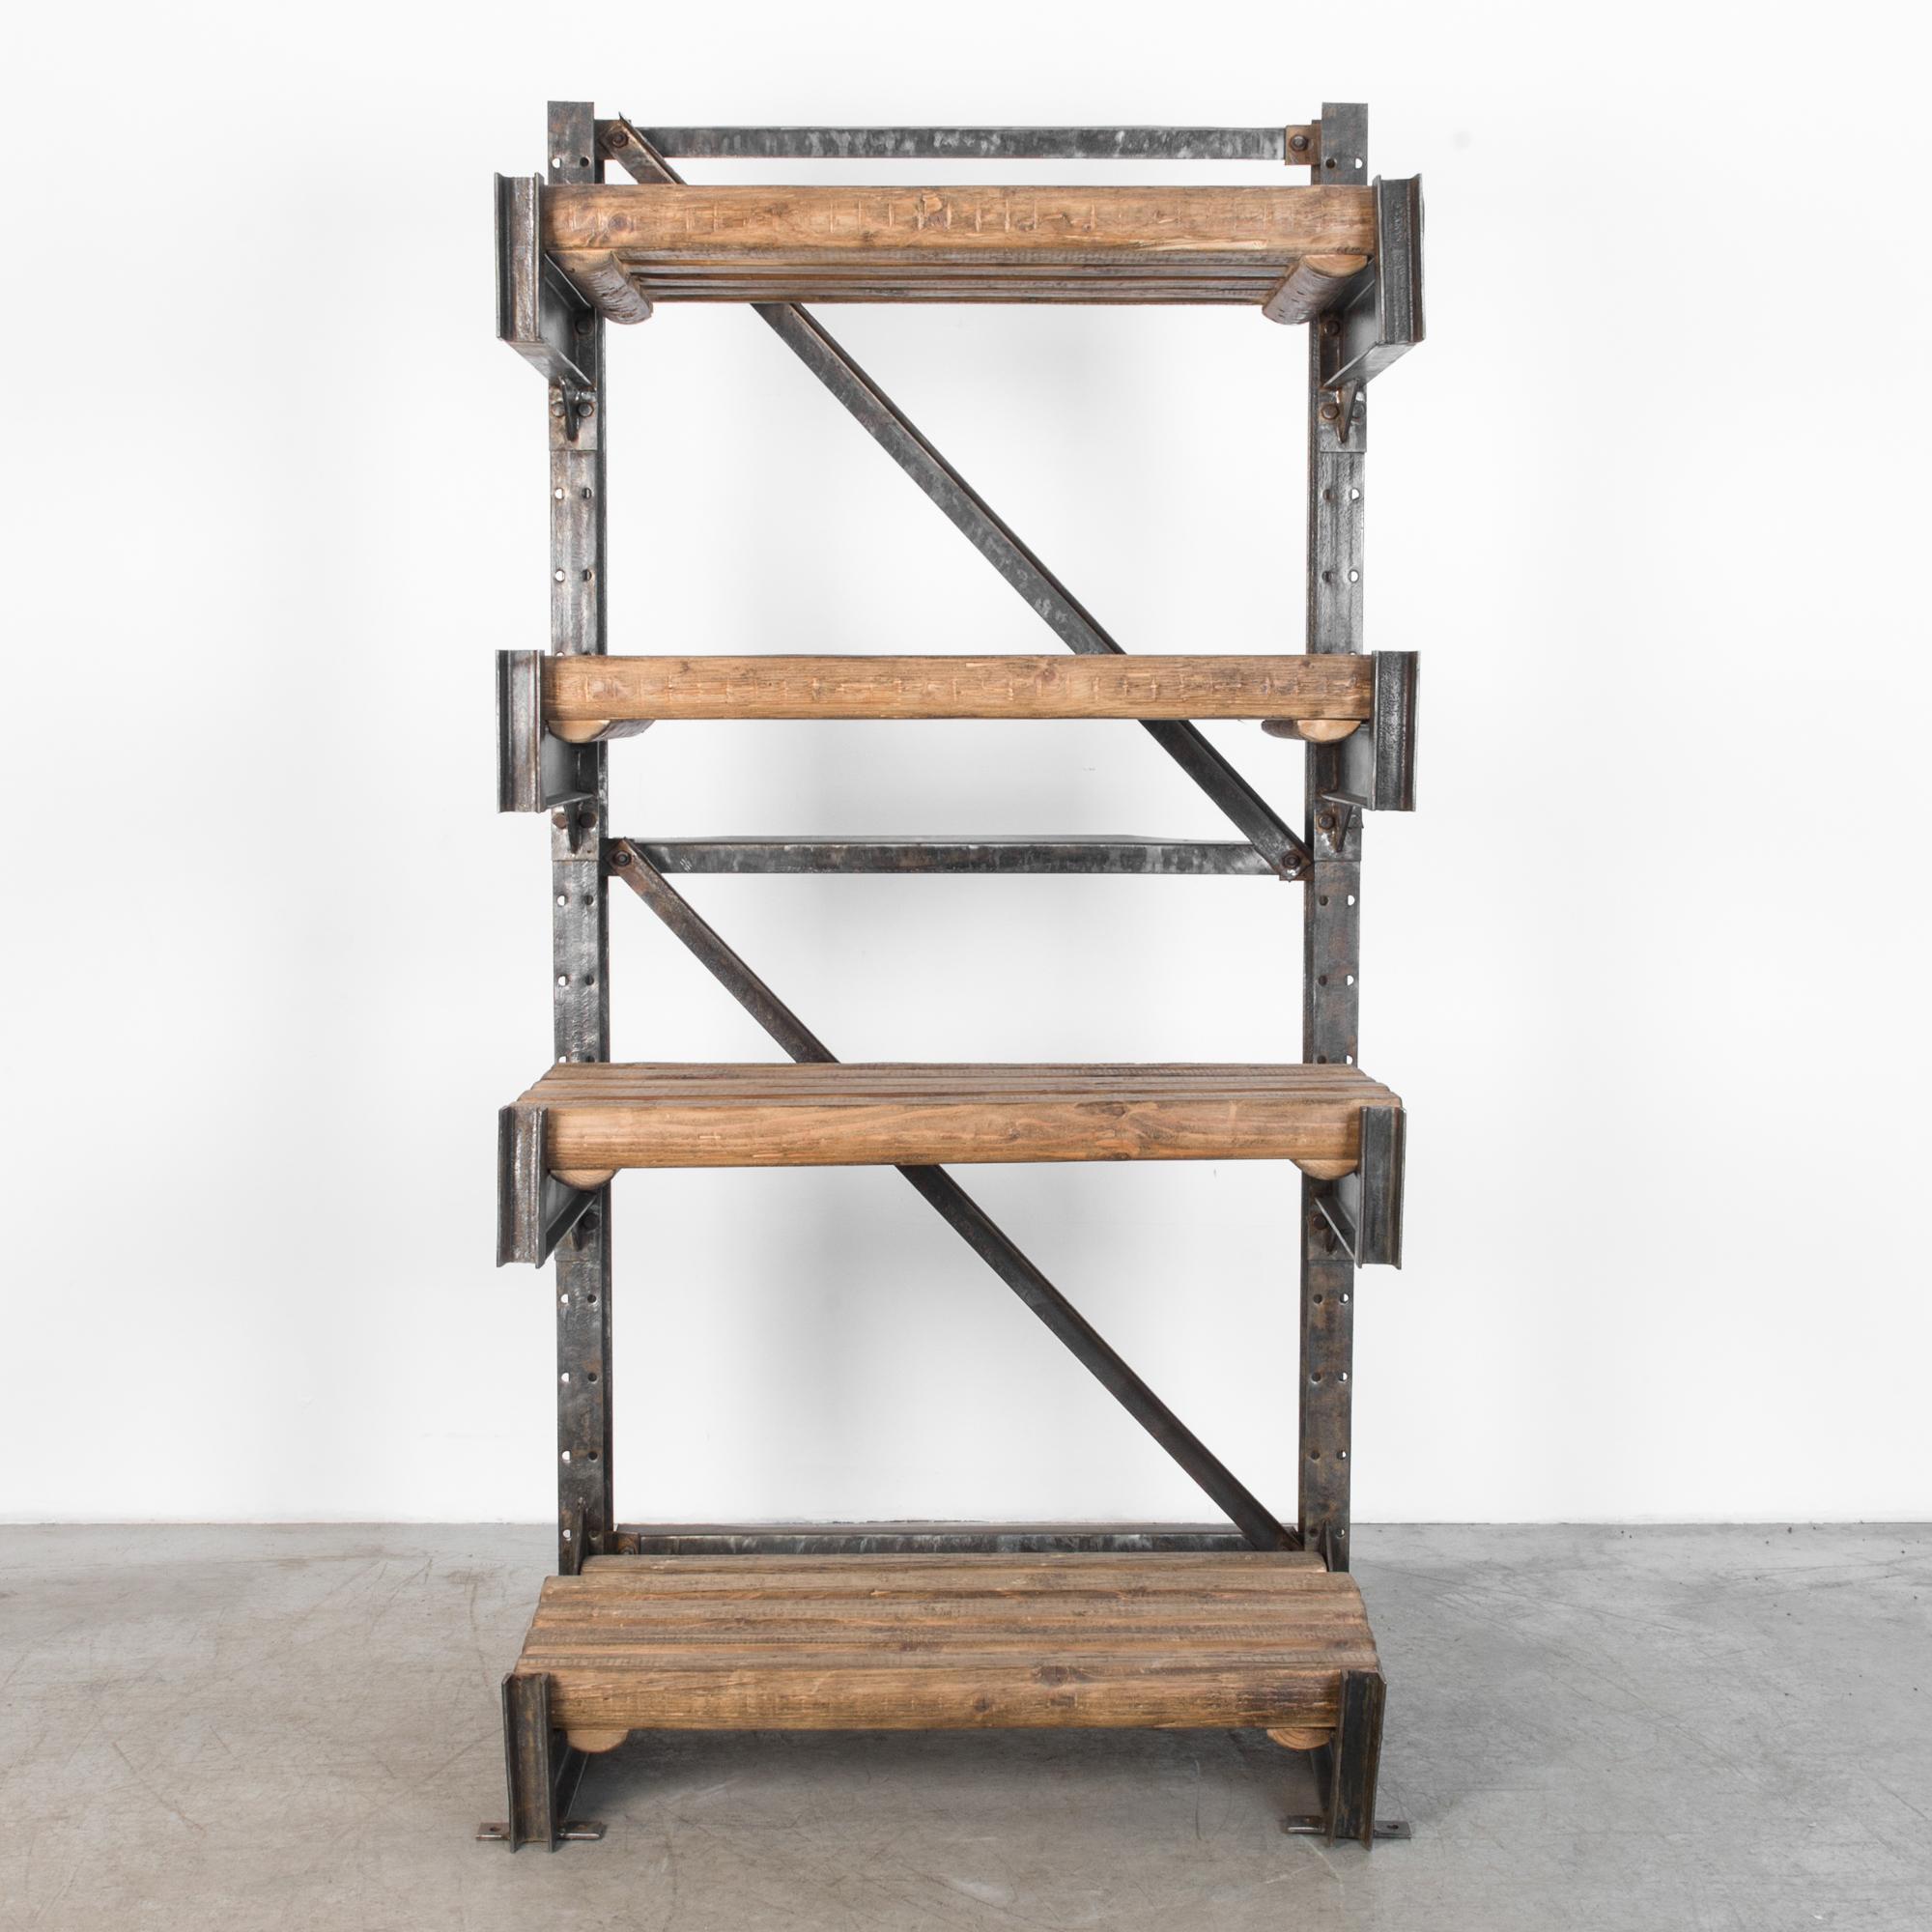 This is a wood and steel shelving unit from Czech Republic, circa 1950. Gorgeous worn patina, these thick wooden shelves are supported by a heavy duty modular steel shelving system. Metal braces give a physical and visual stability, interrupted by a